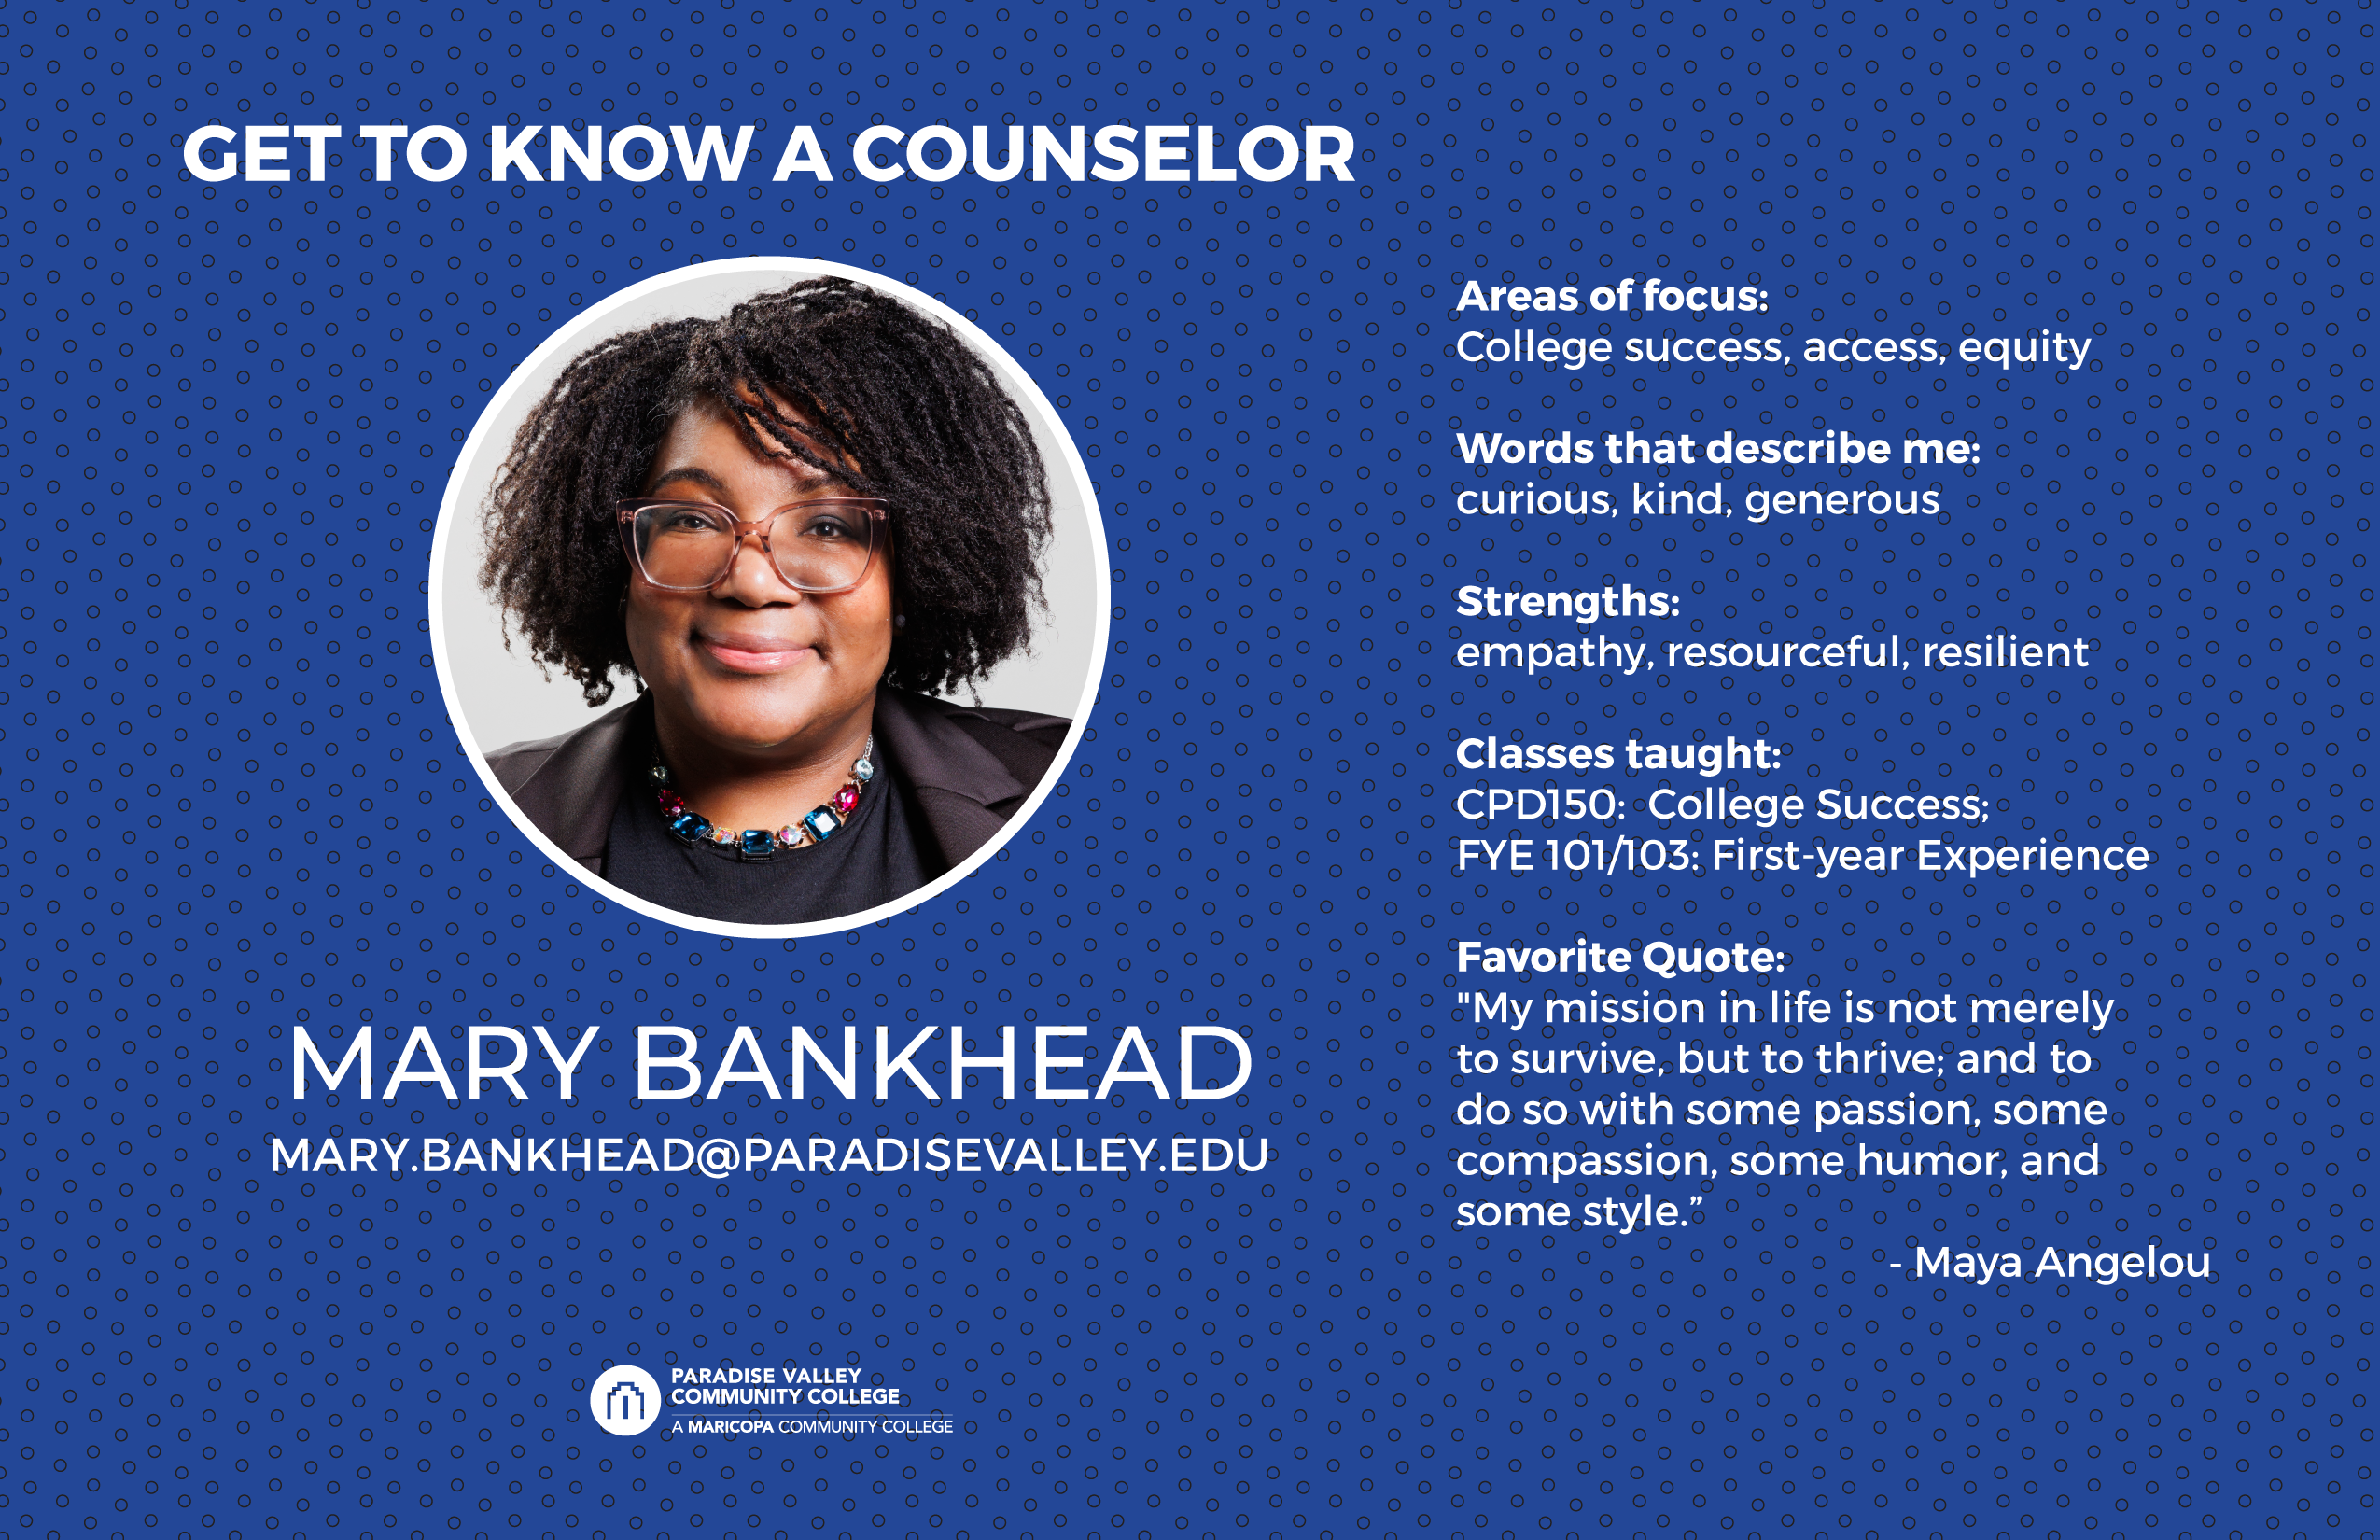 Mary Bankhead - Counselor